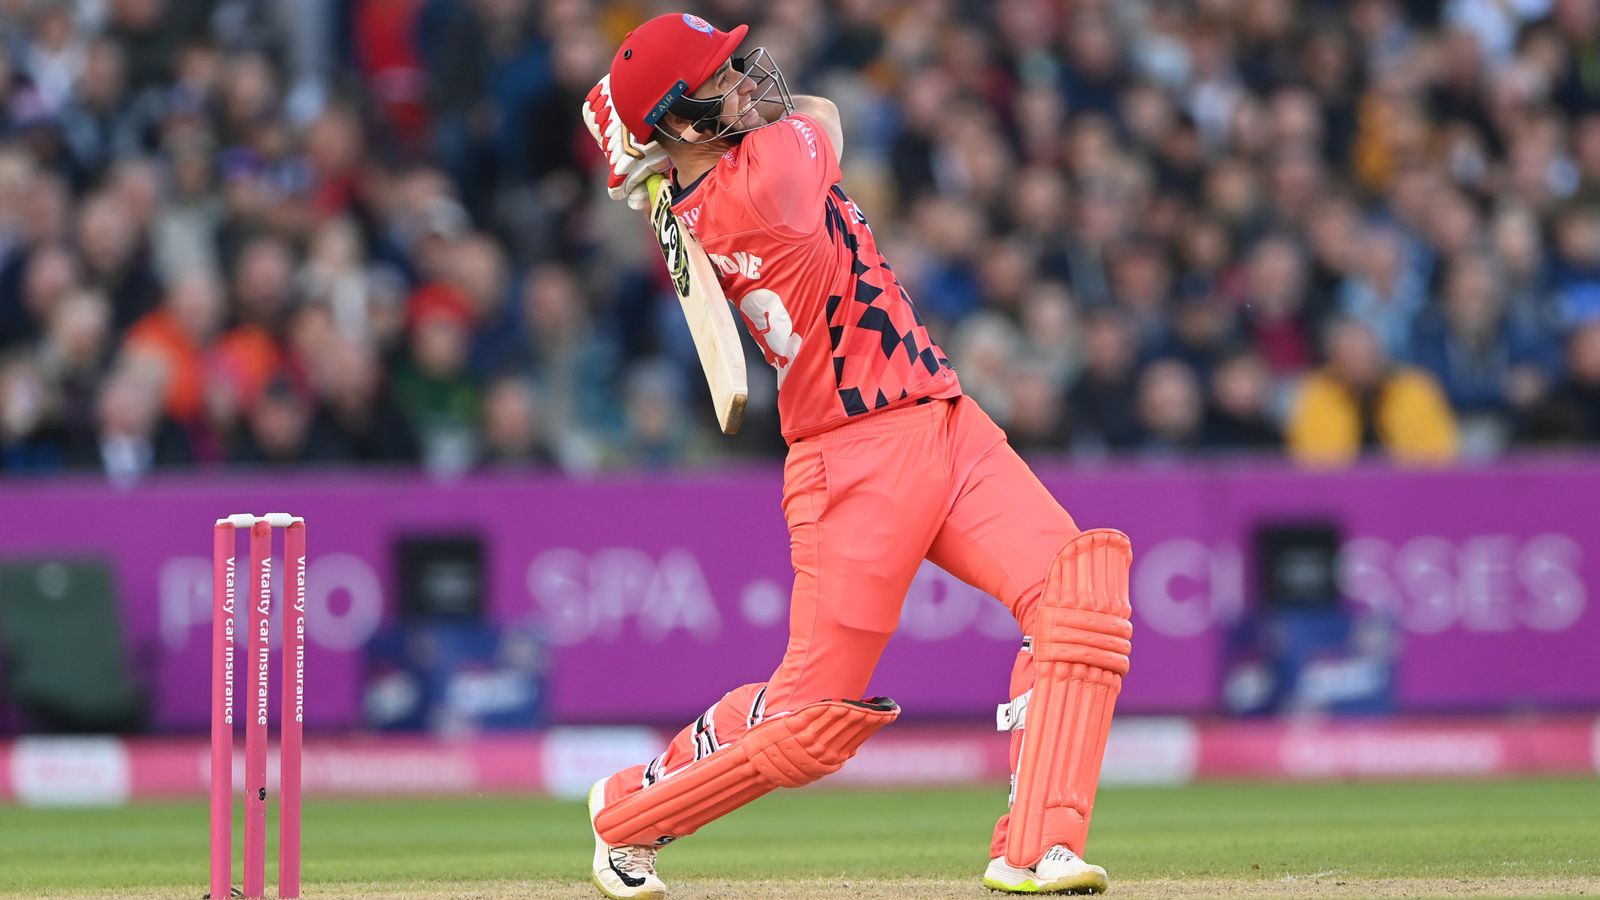 Vitality Blast: Liam Livingstone leads the way for Lancashire in victory over spirited Derbyshire